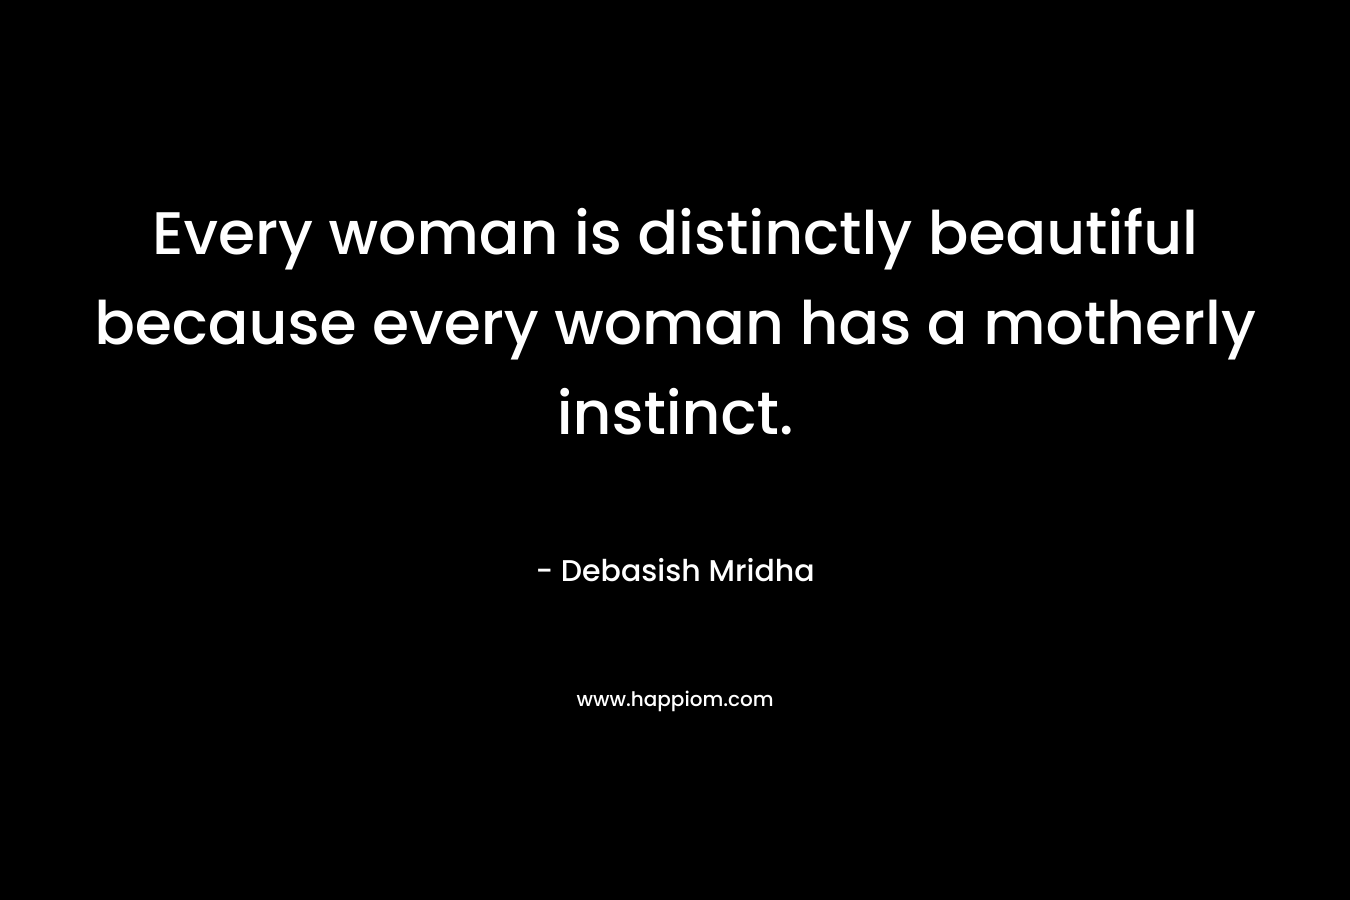 Every woman is distinctly beautiful because every woman has a motherly instinct.